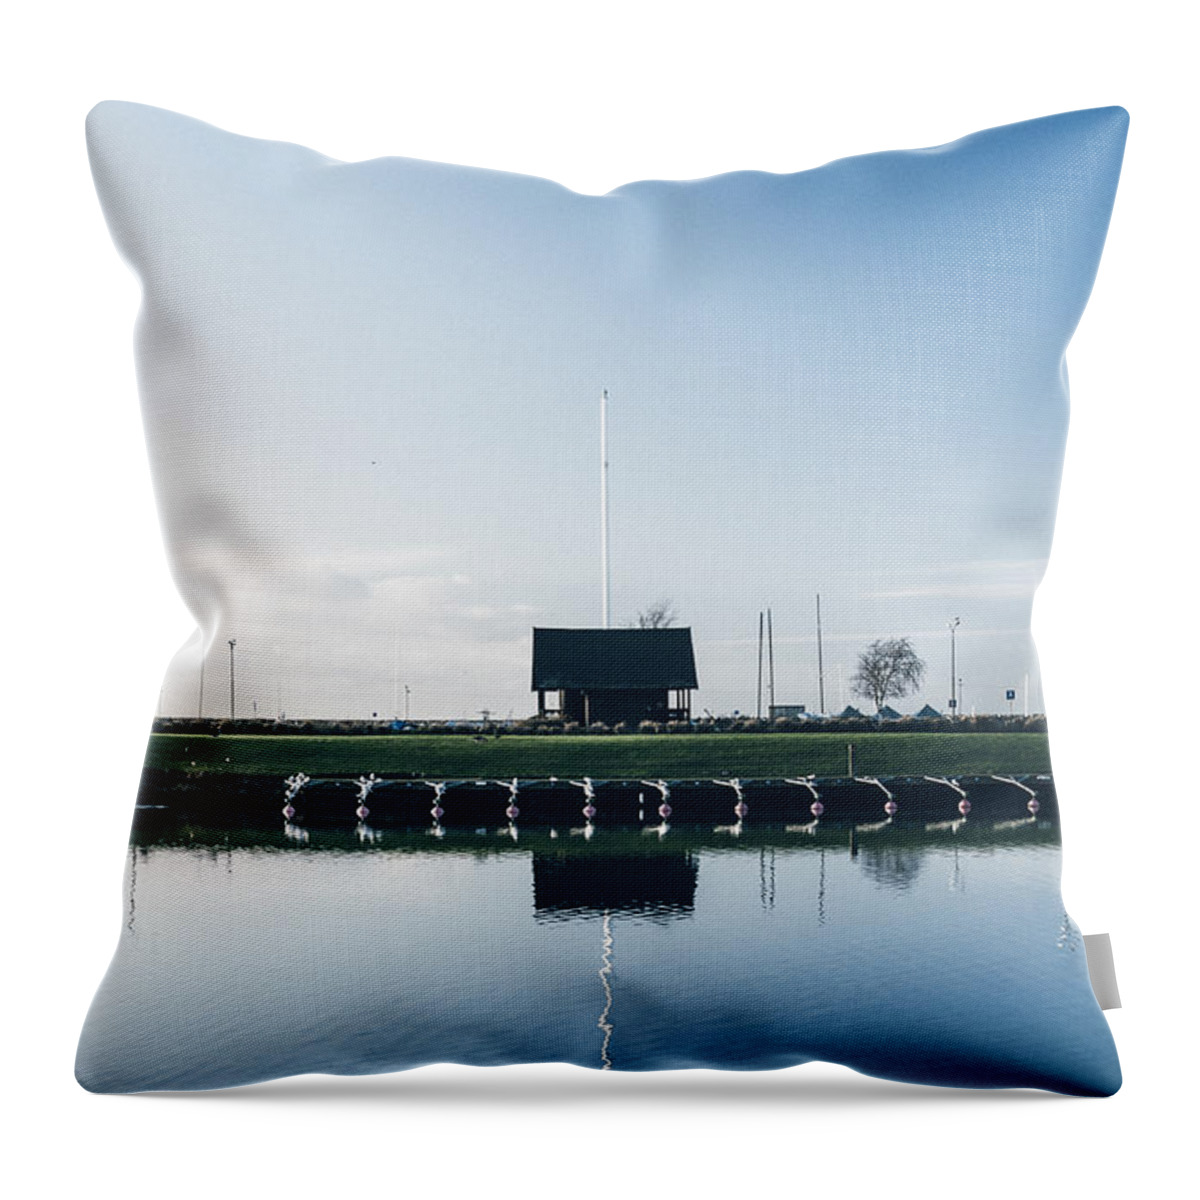 Beauty Throw Pillow featuring the photograph The Clubhouse by Marcus Karlsson Sall